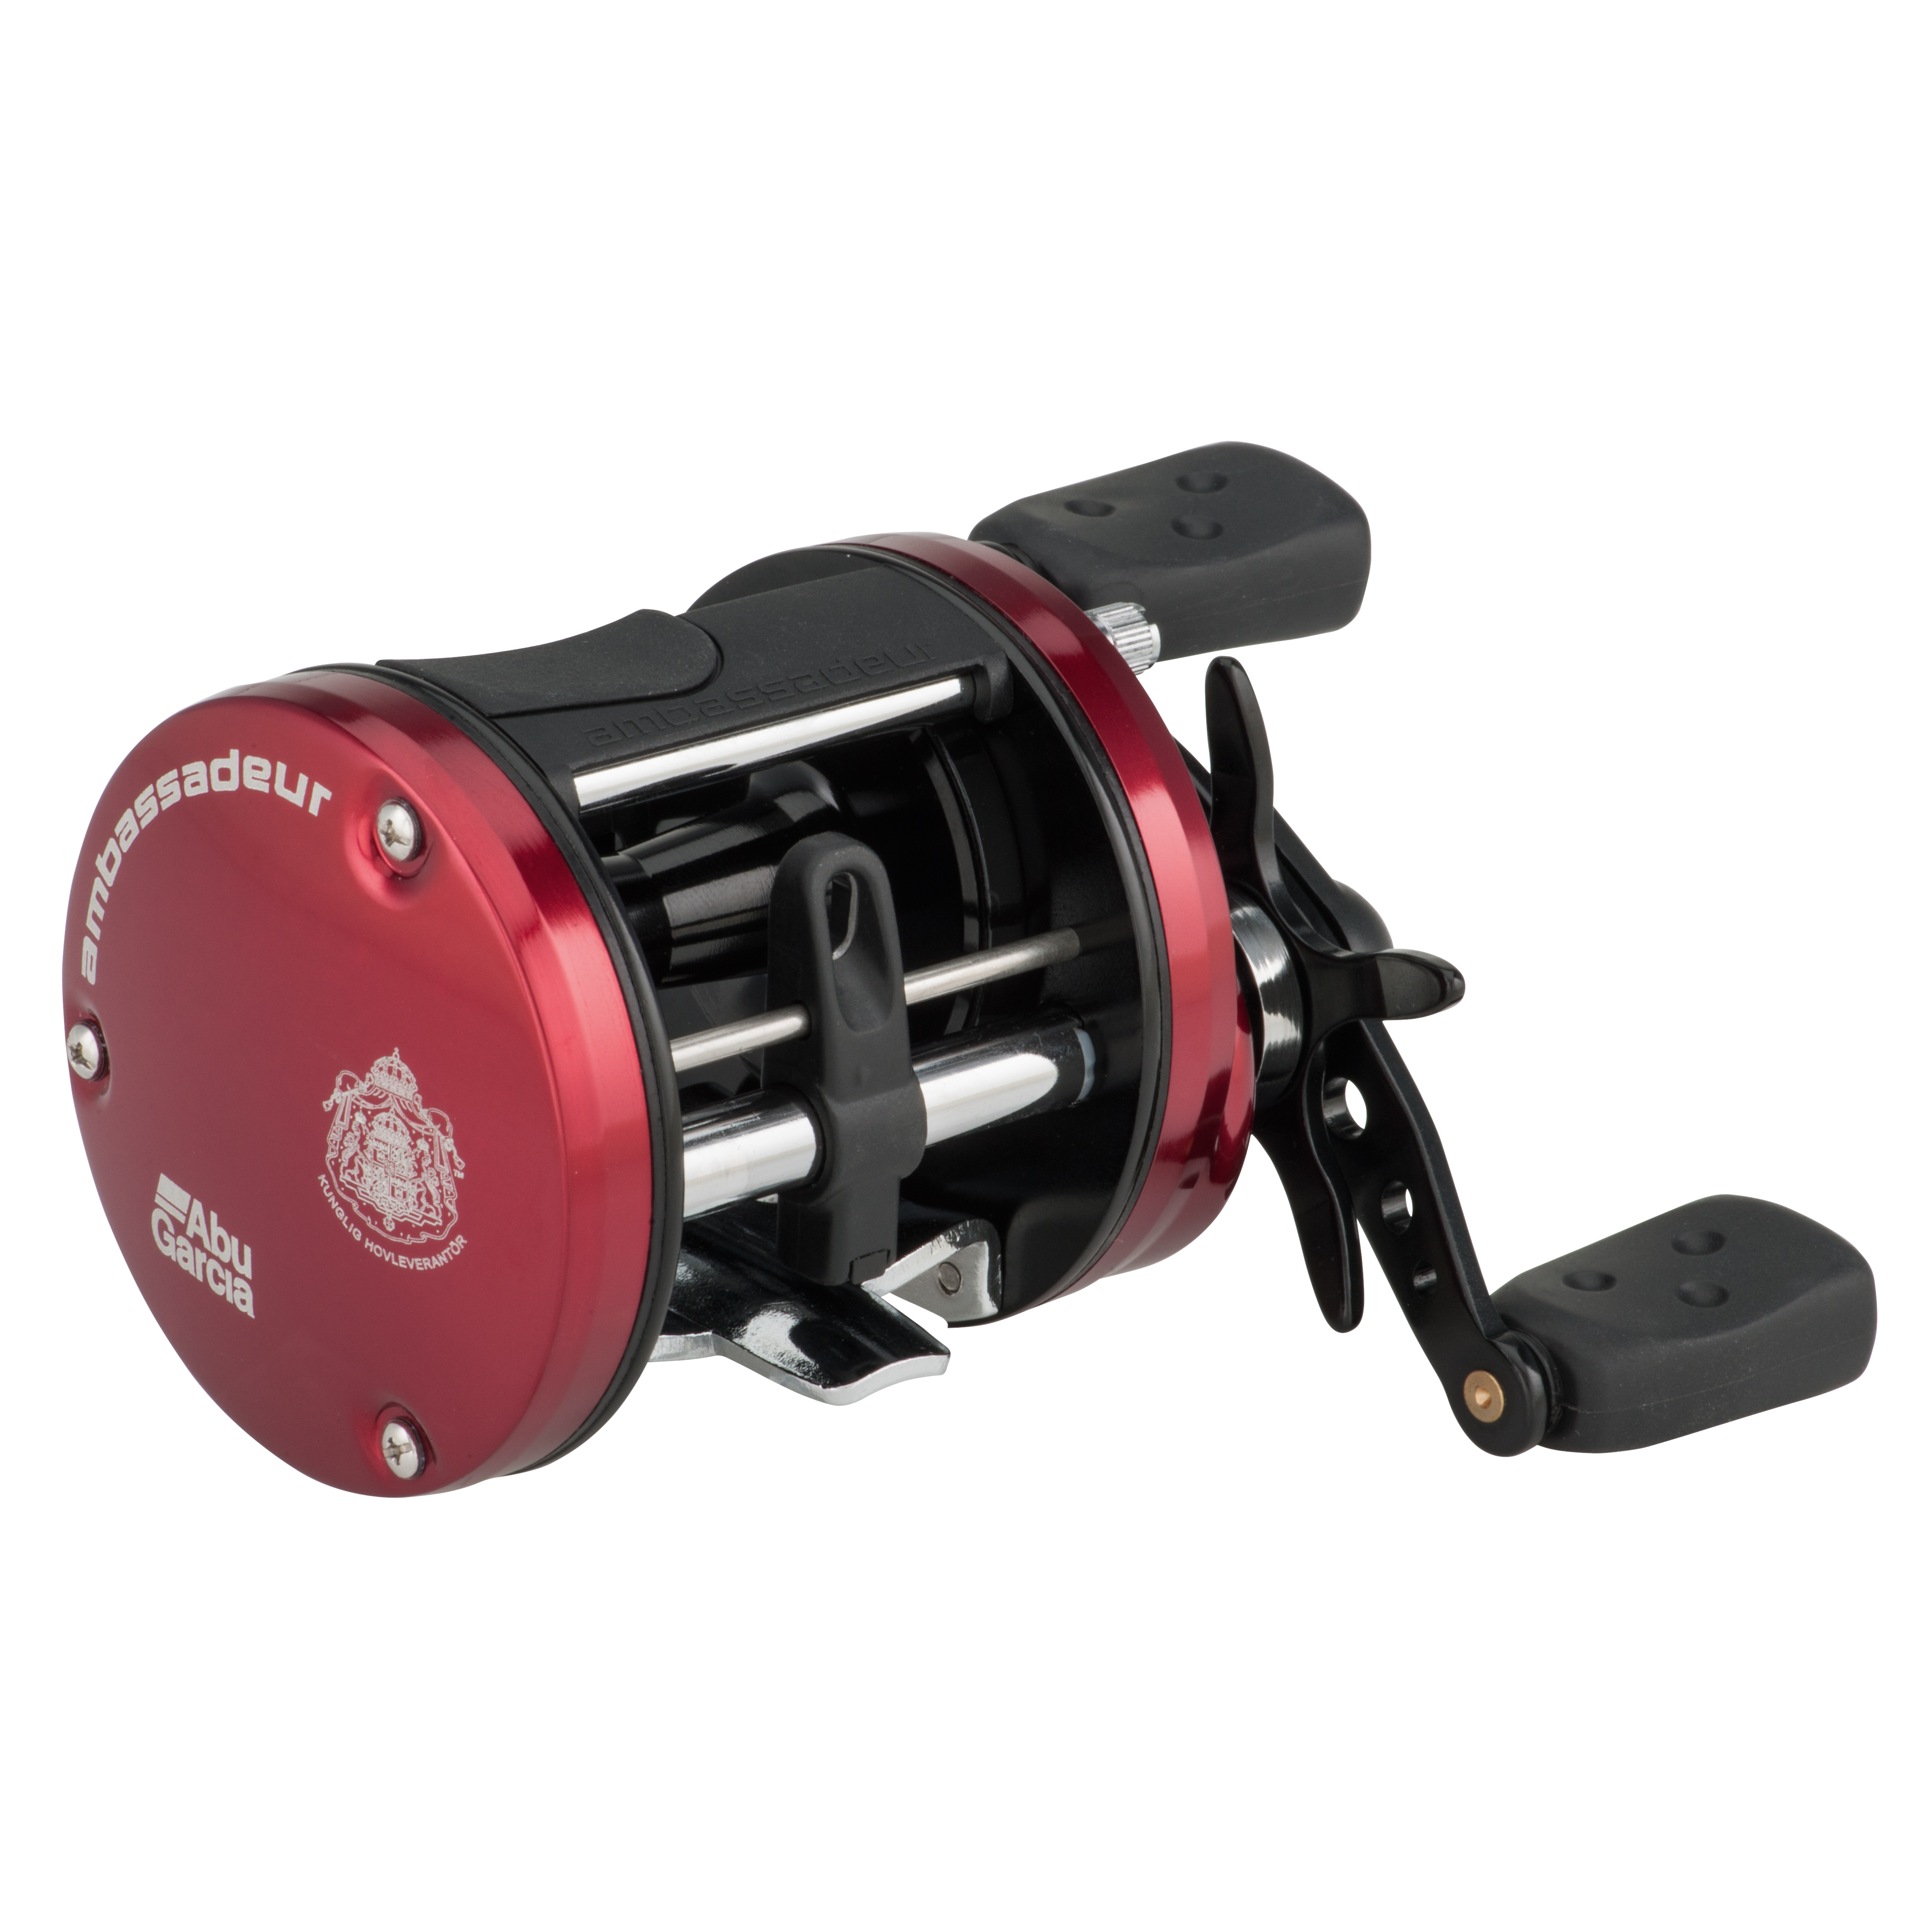 Abu Garcia C3 Striper Special Round Reel – Lures and Lead